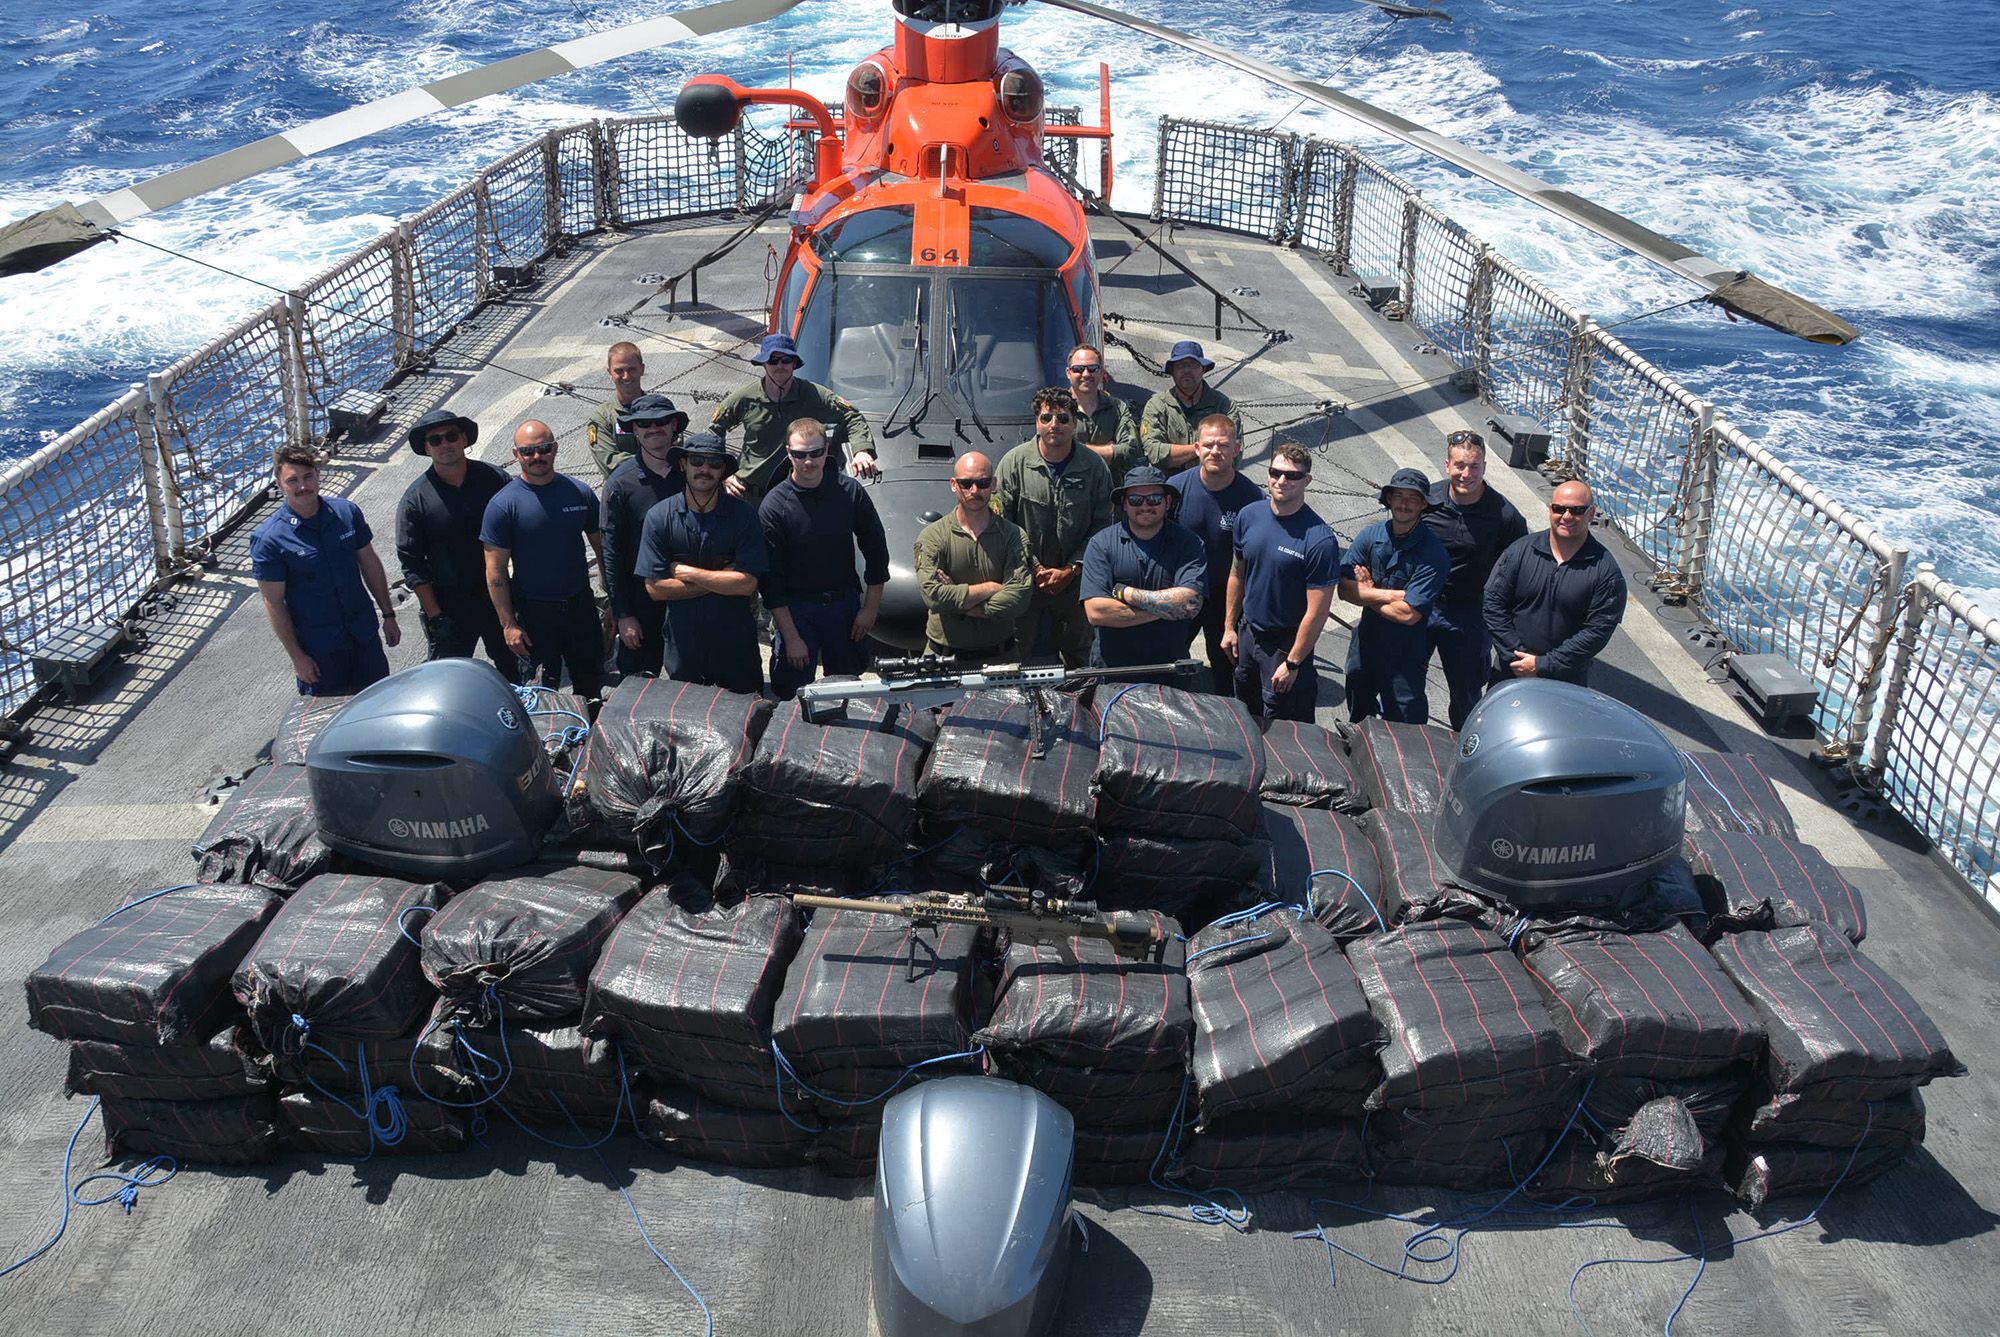 Crewmembers of the Coast Guard Cutter Alert (WMEC 630) stand behind cocaine bales seized from a dru...